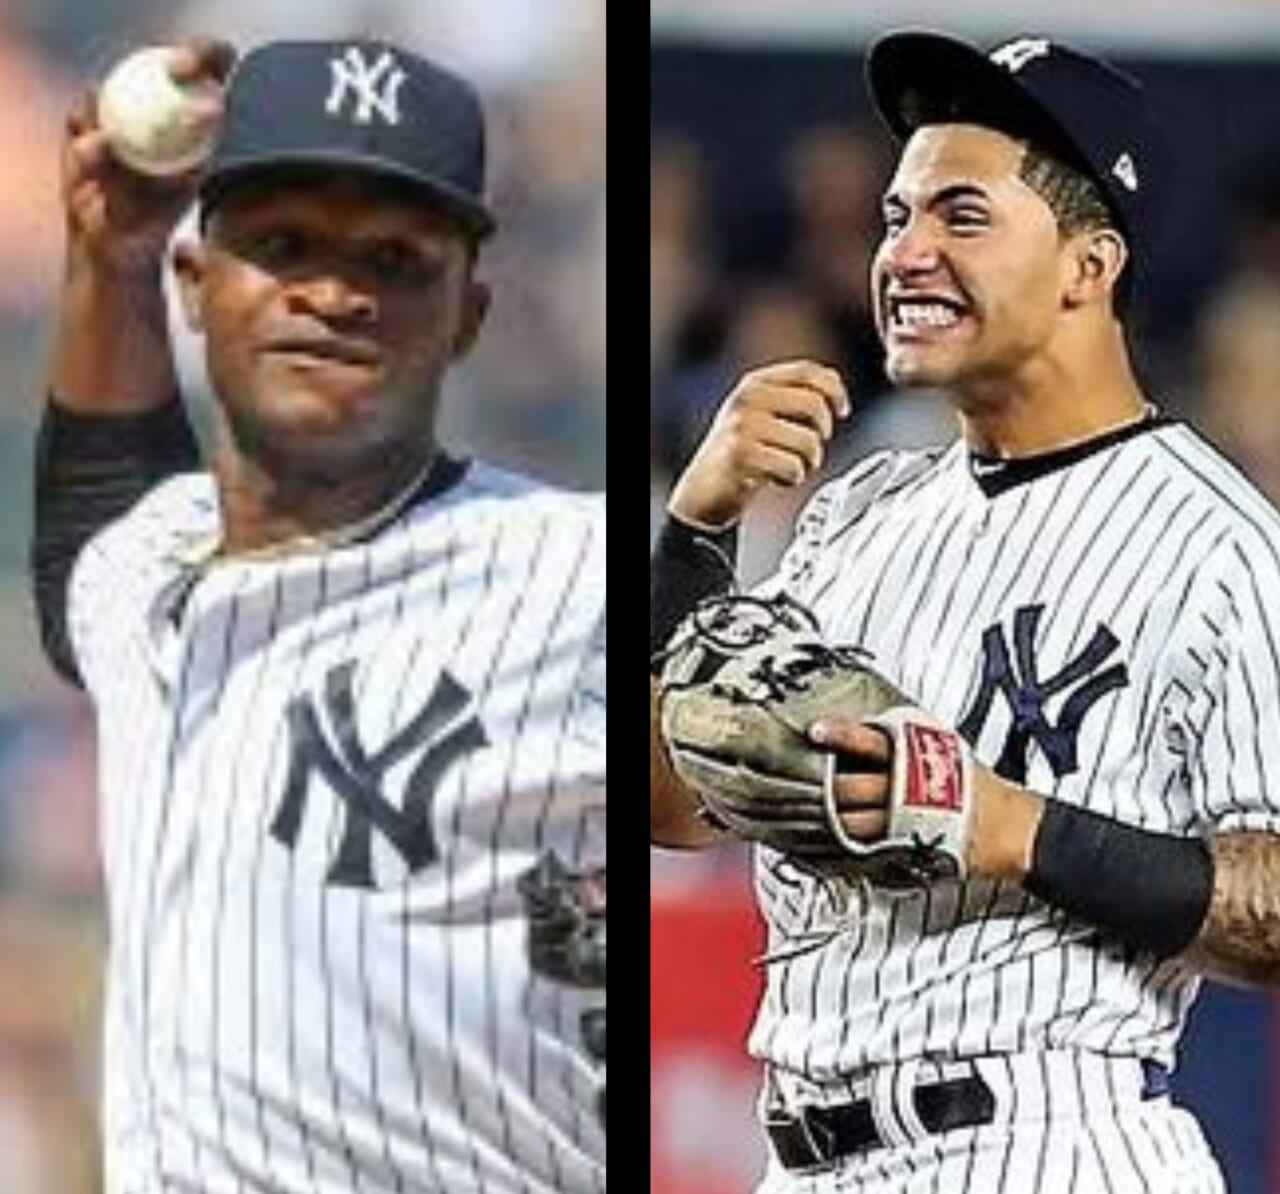 New York Yankees Analysis: My 2021 predictions and where they stand at the halfway point